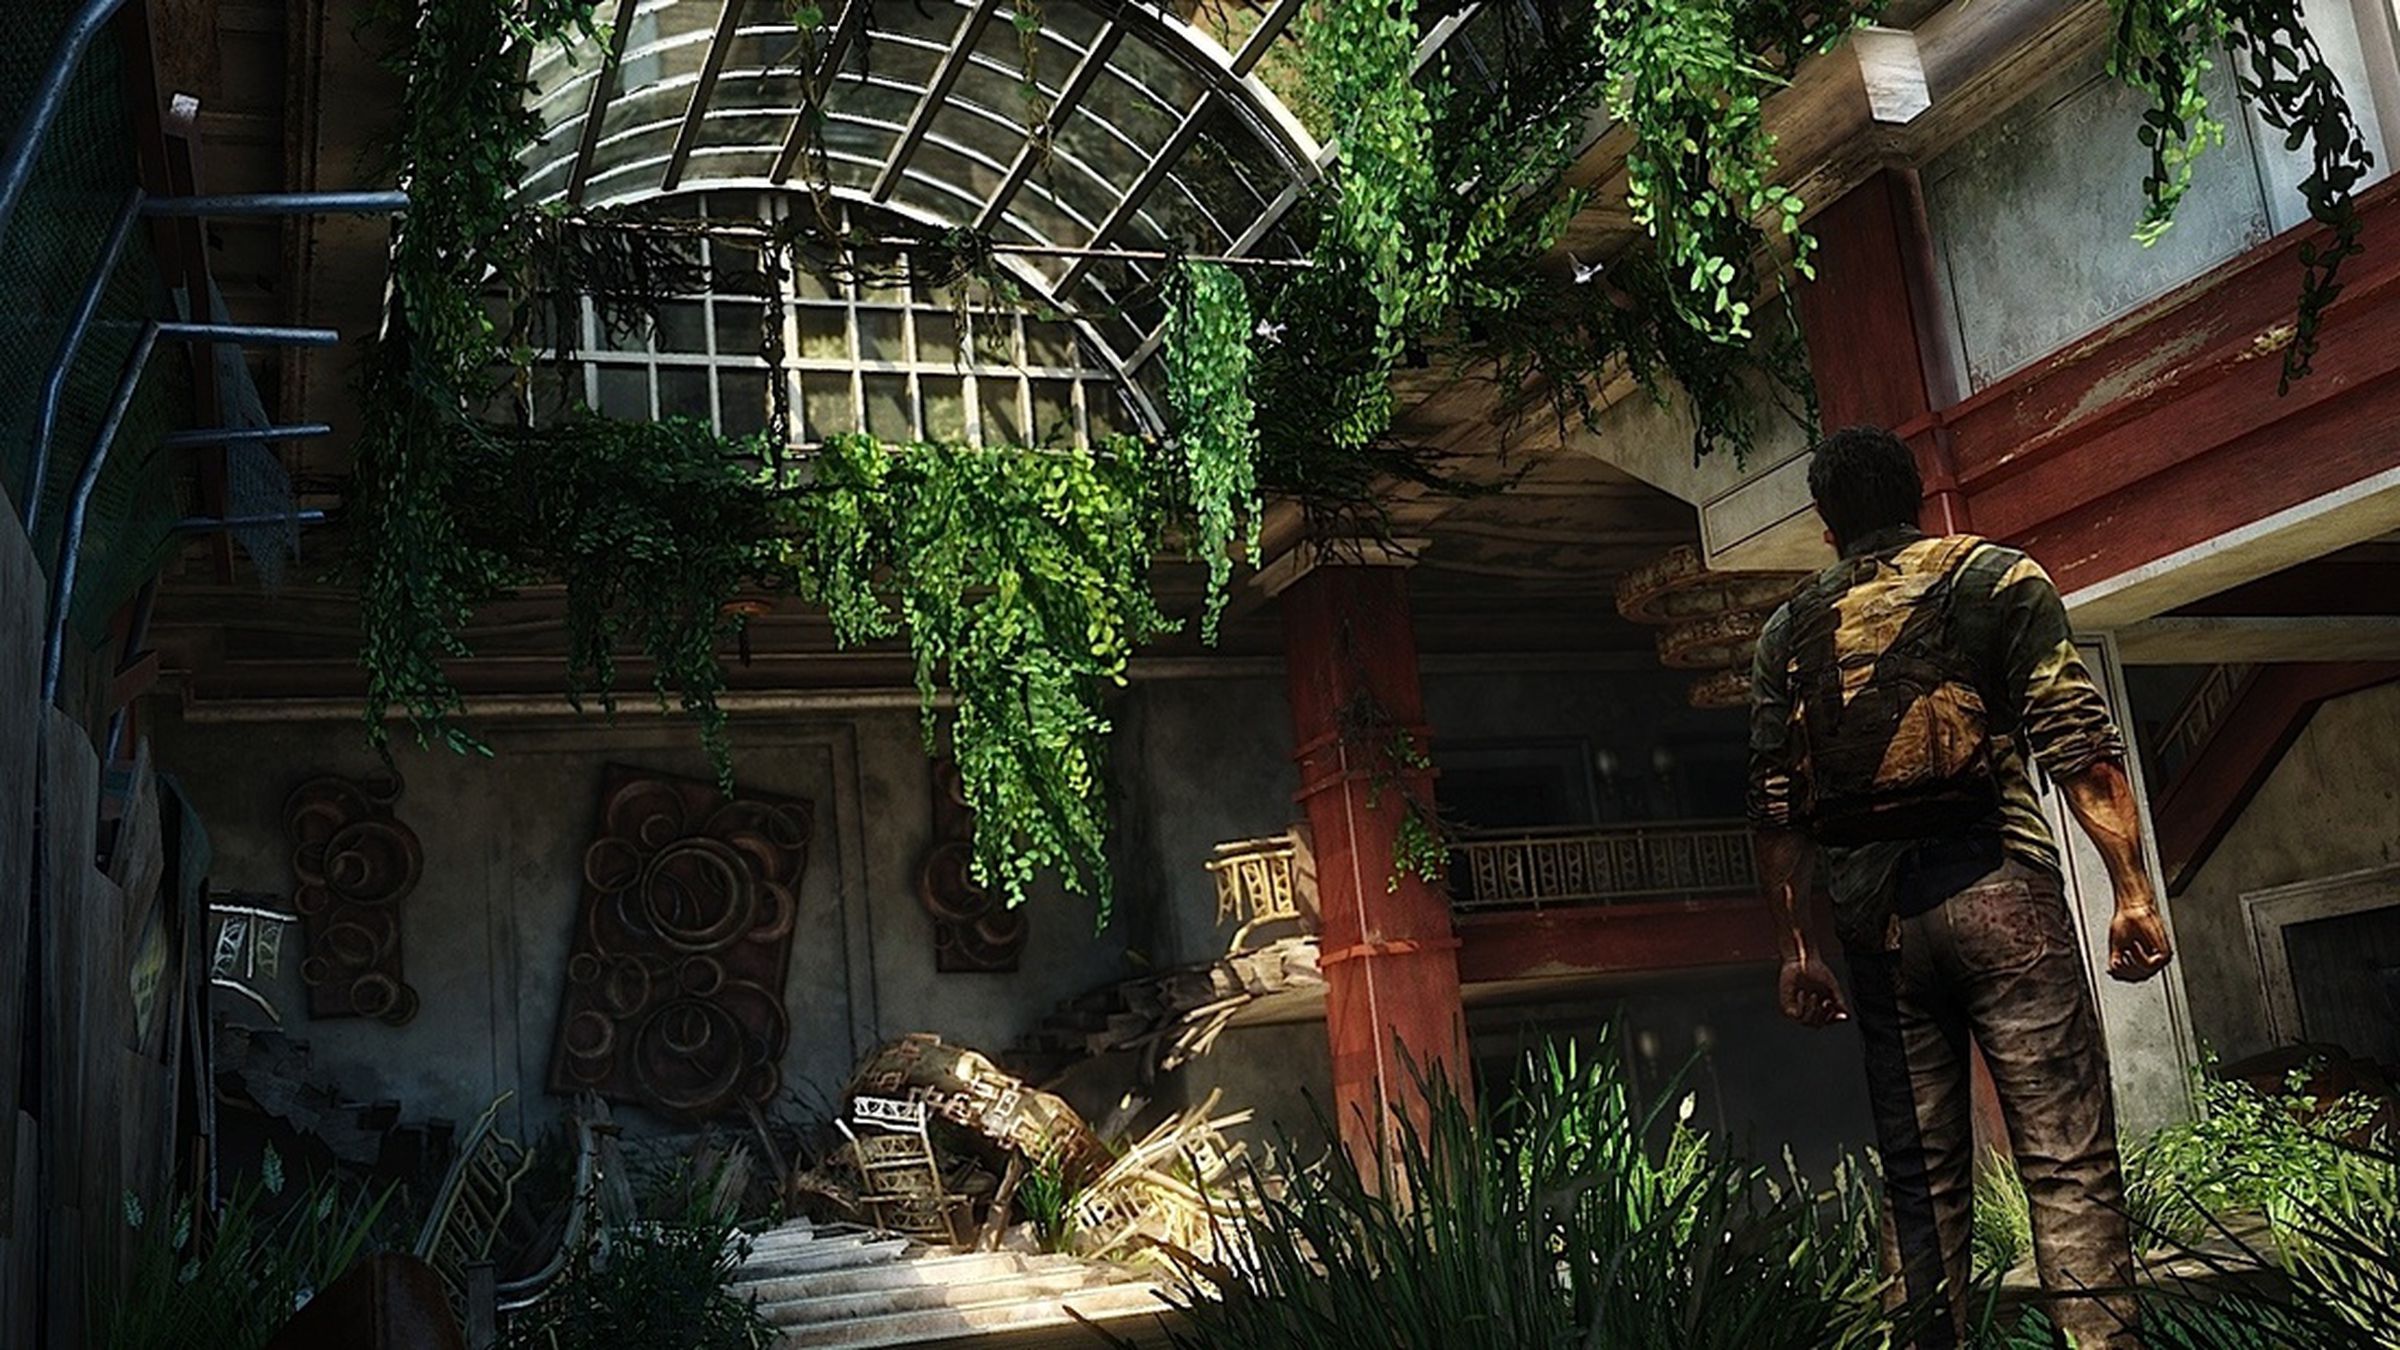 The Last of Us (E3 2012 gallery)